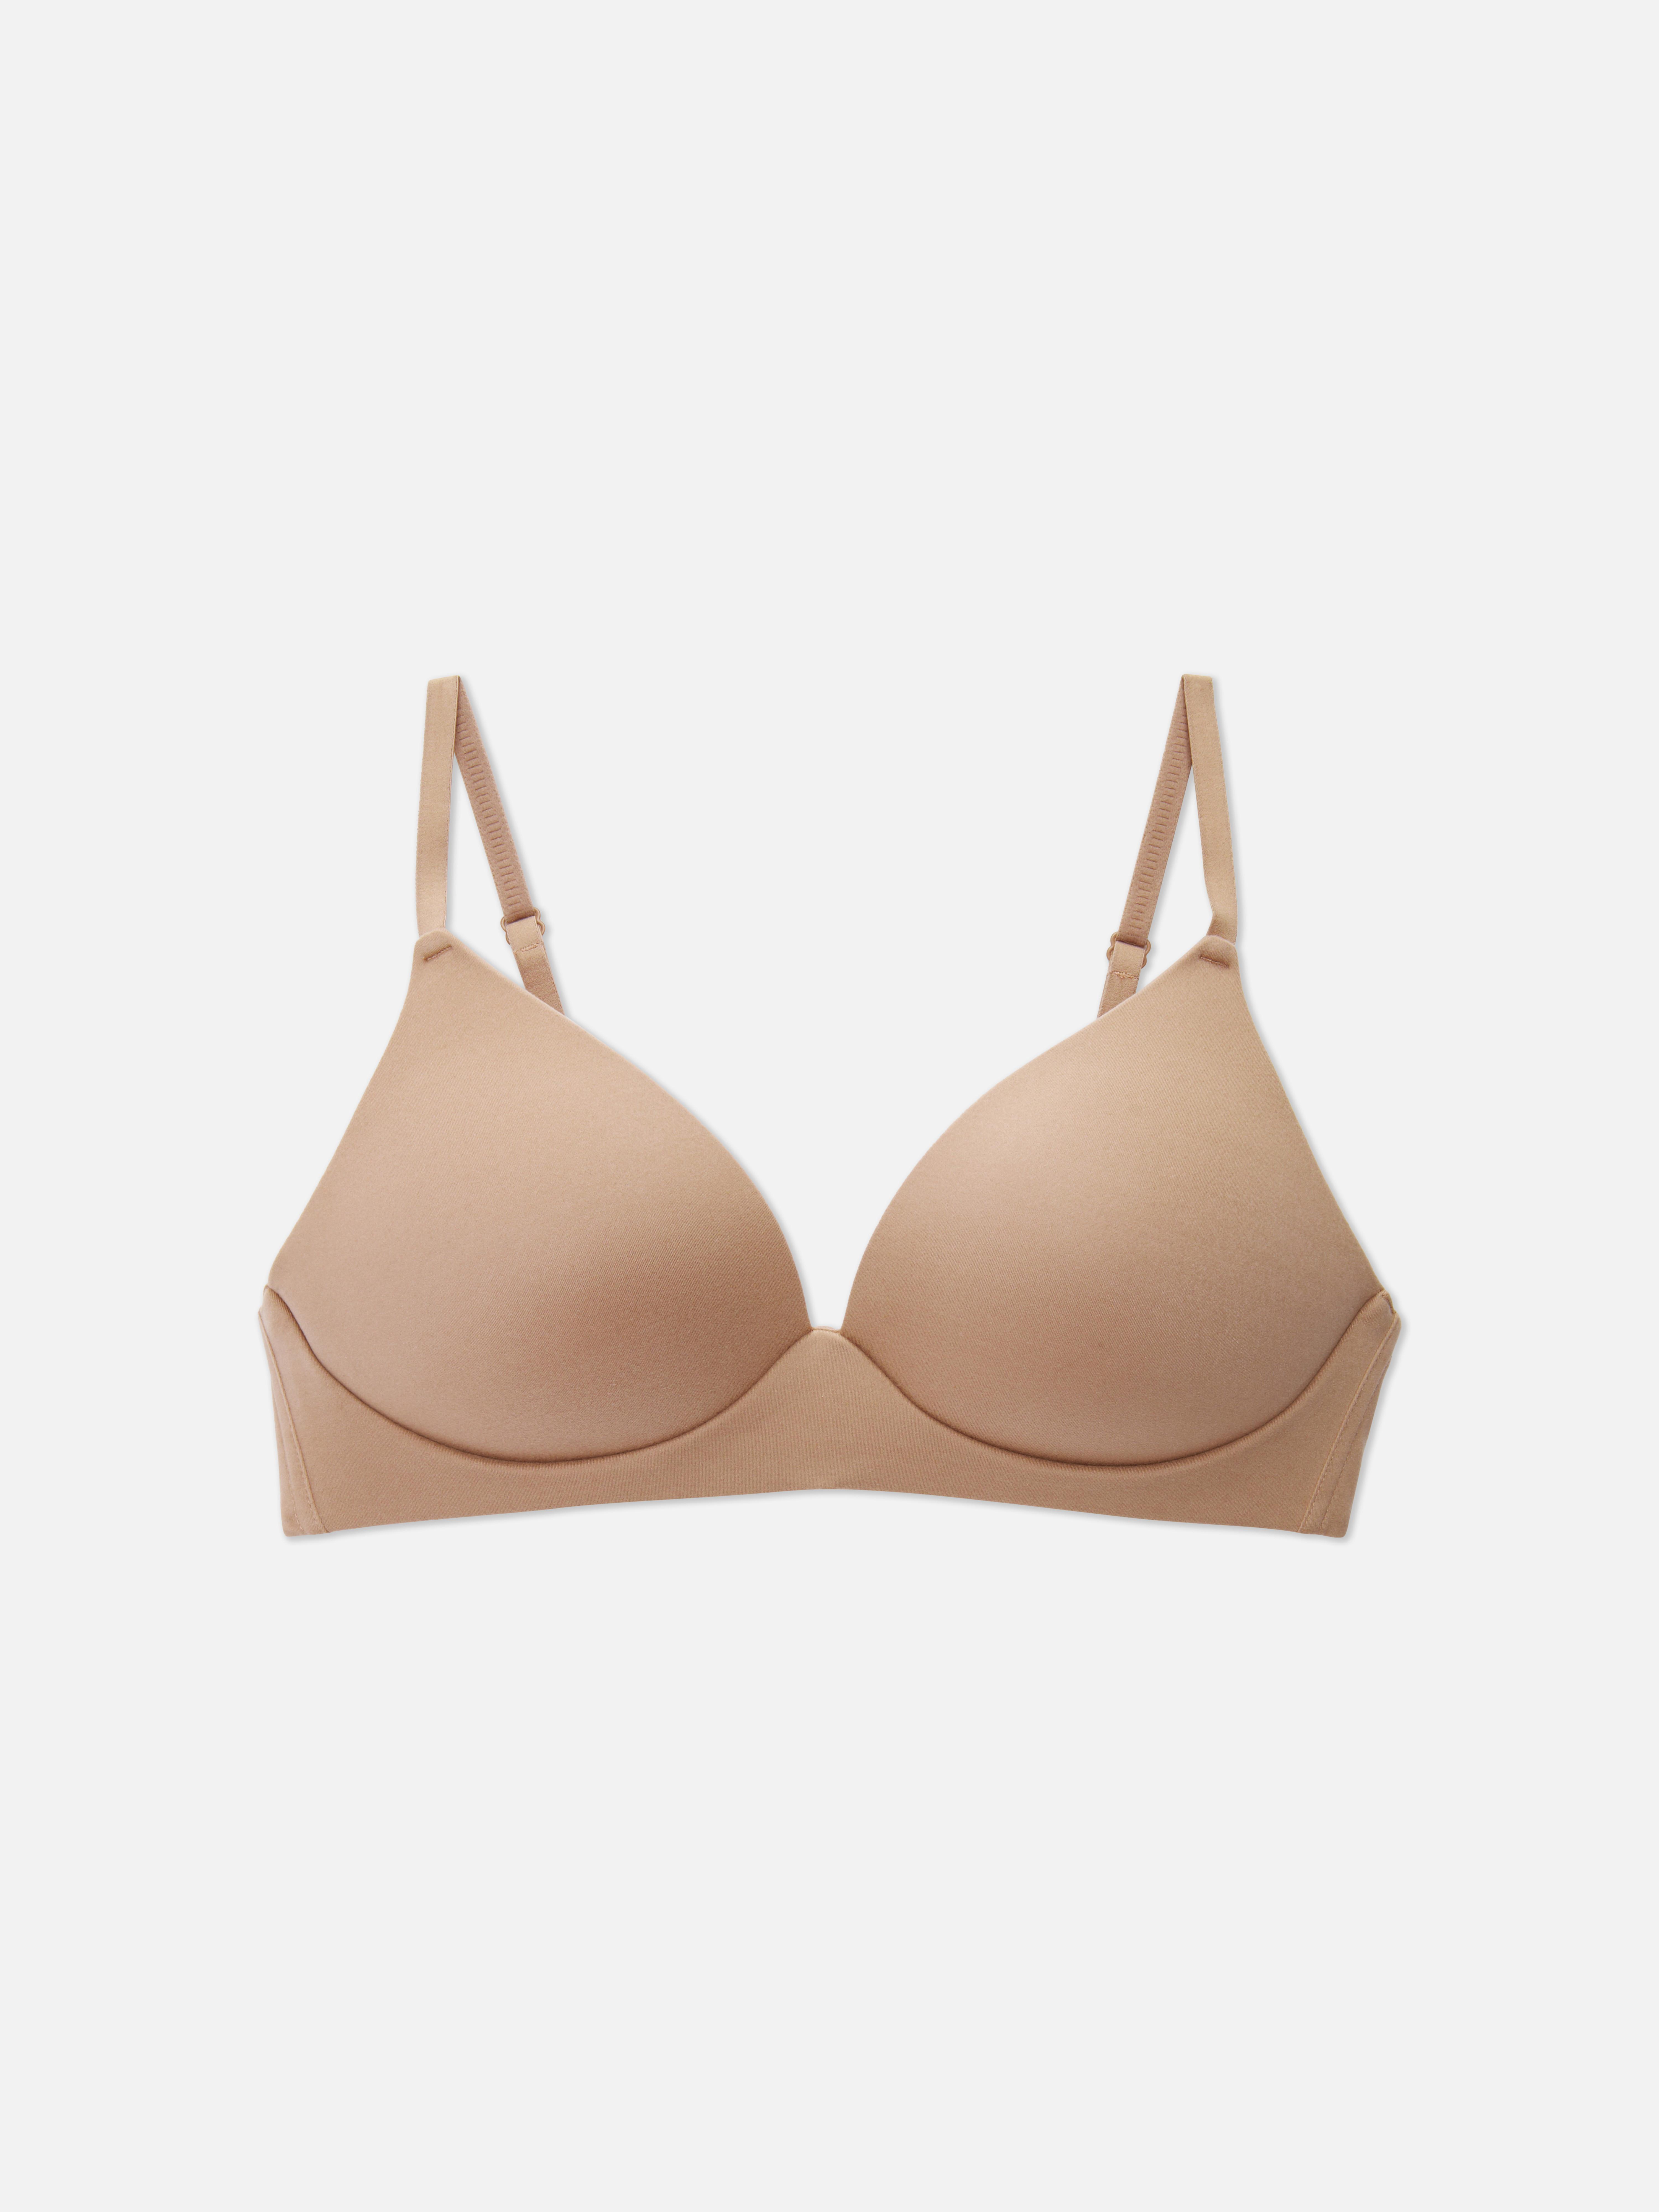 EX PRIMARK STRAPLESS Bra Lace Up Stick On Backless Cup Size A - D (P119)  £4.27 - PicClick UK